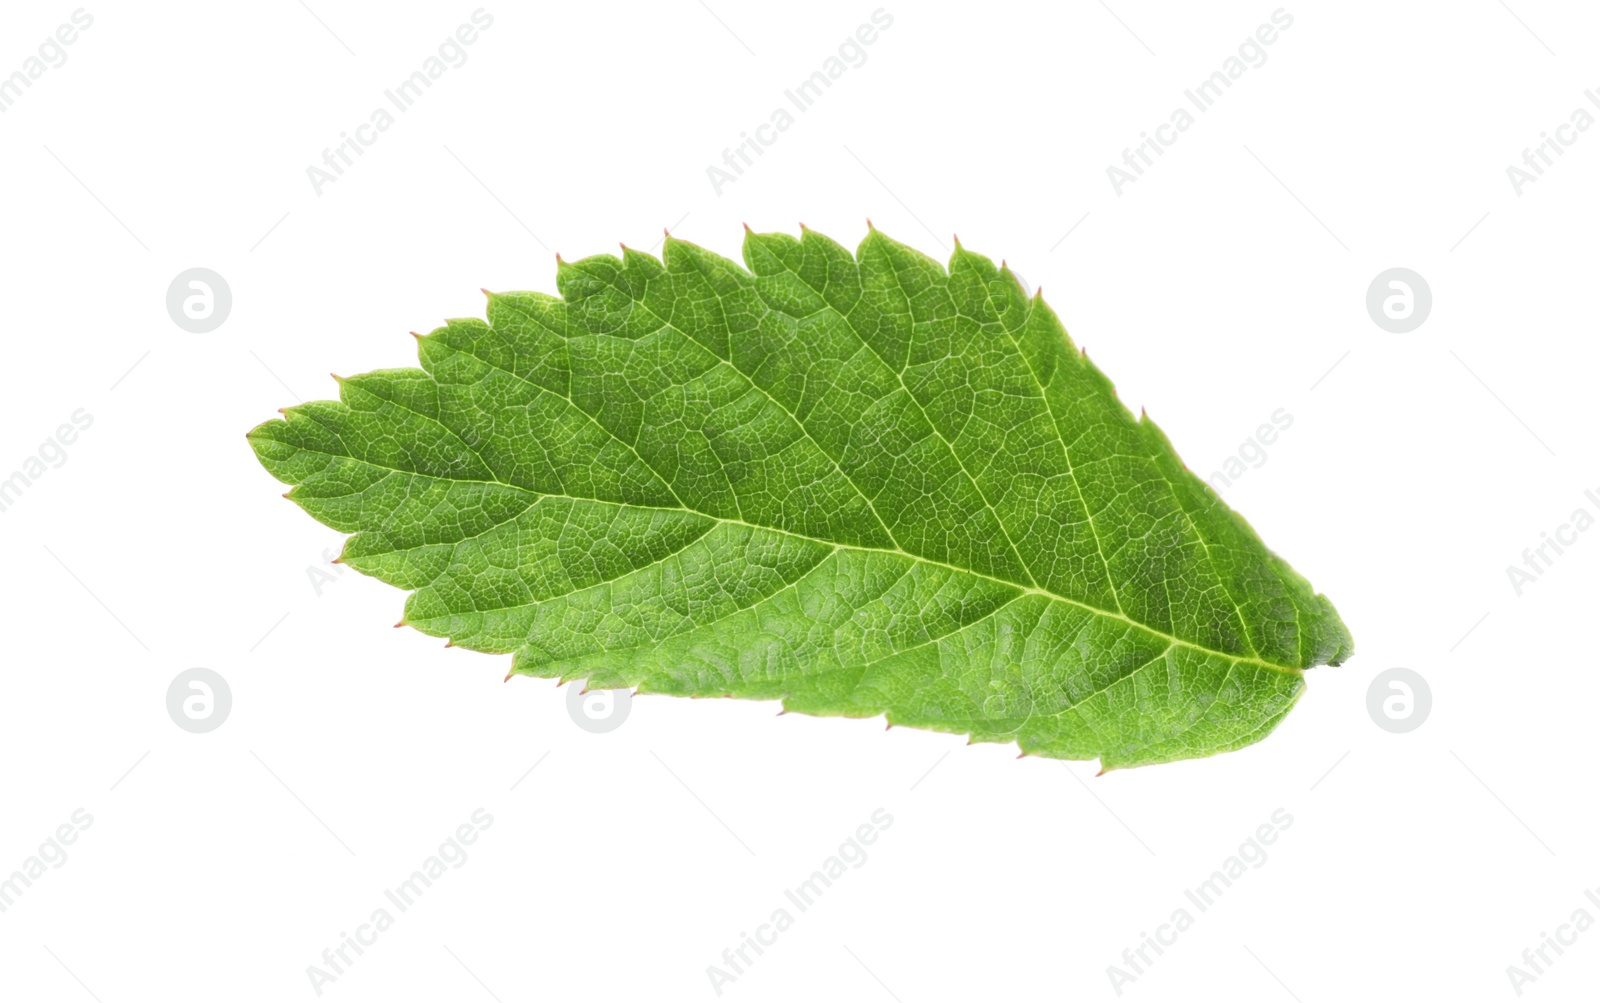 Photo of One green raspberry leaf isolated on white